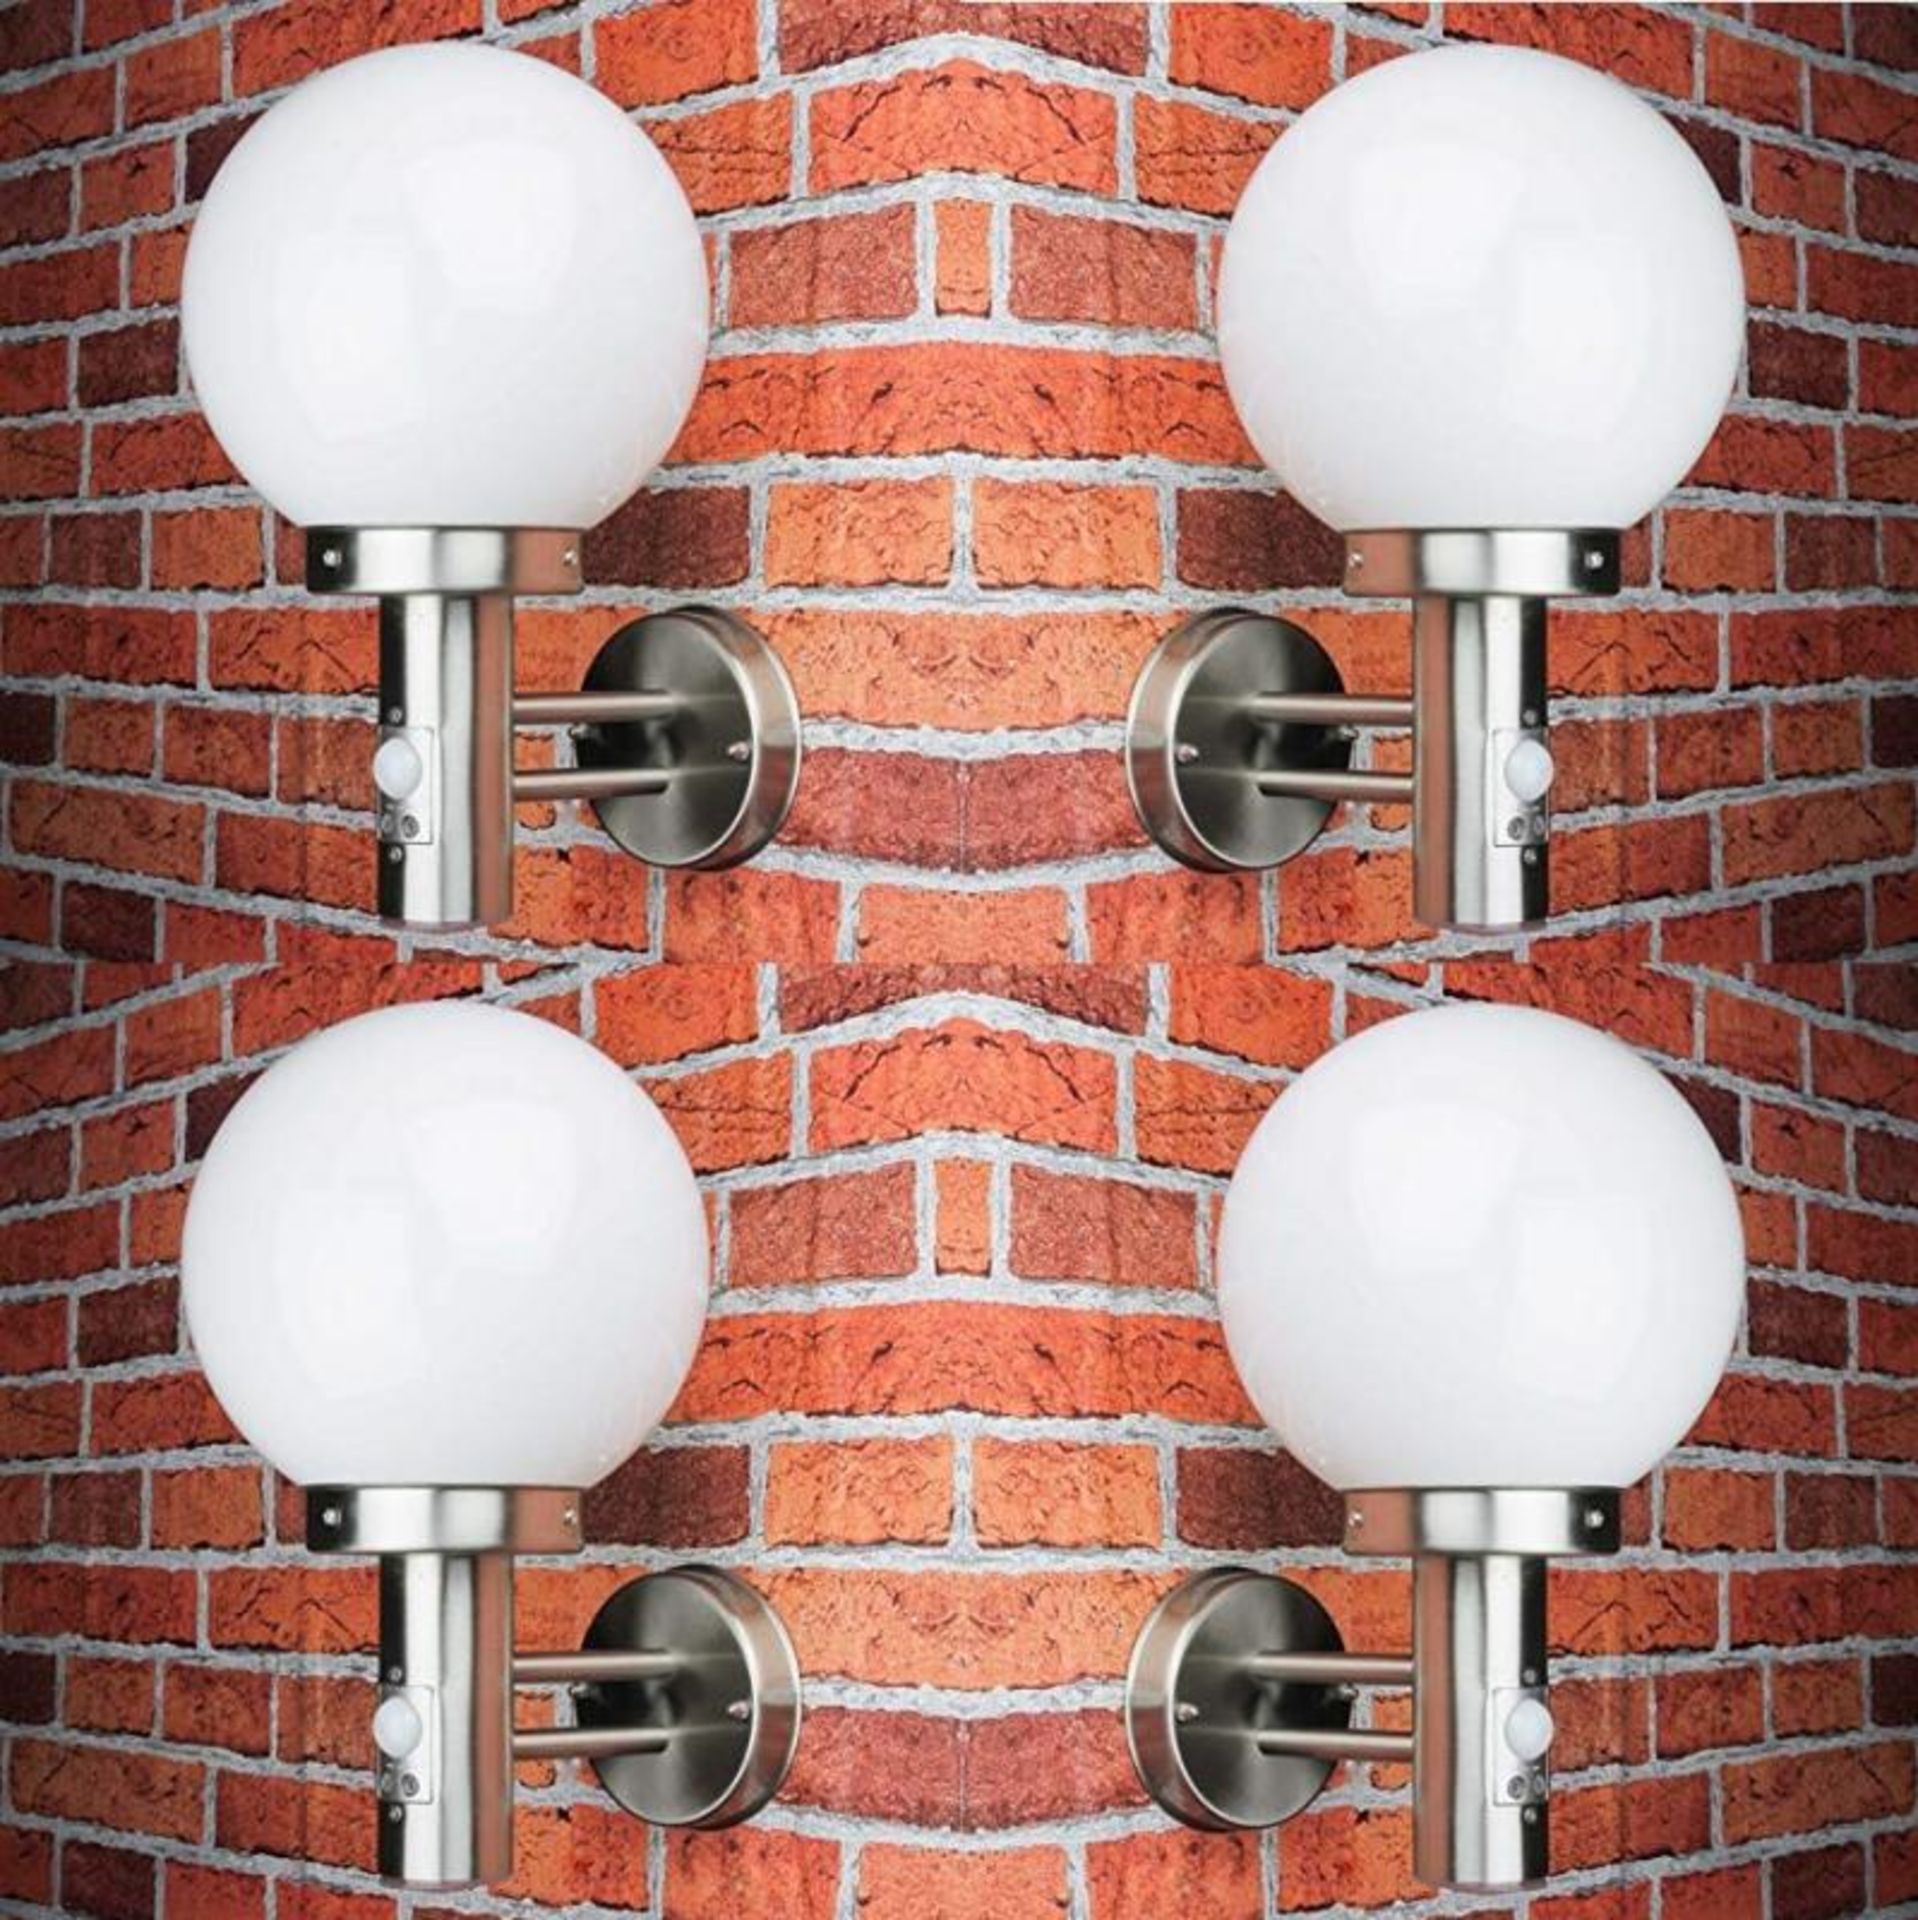 4 x Globe Outdoor Wall Light With PIR Motion Sensor - Stainless Steel With Polycarbonate Shade - IP4